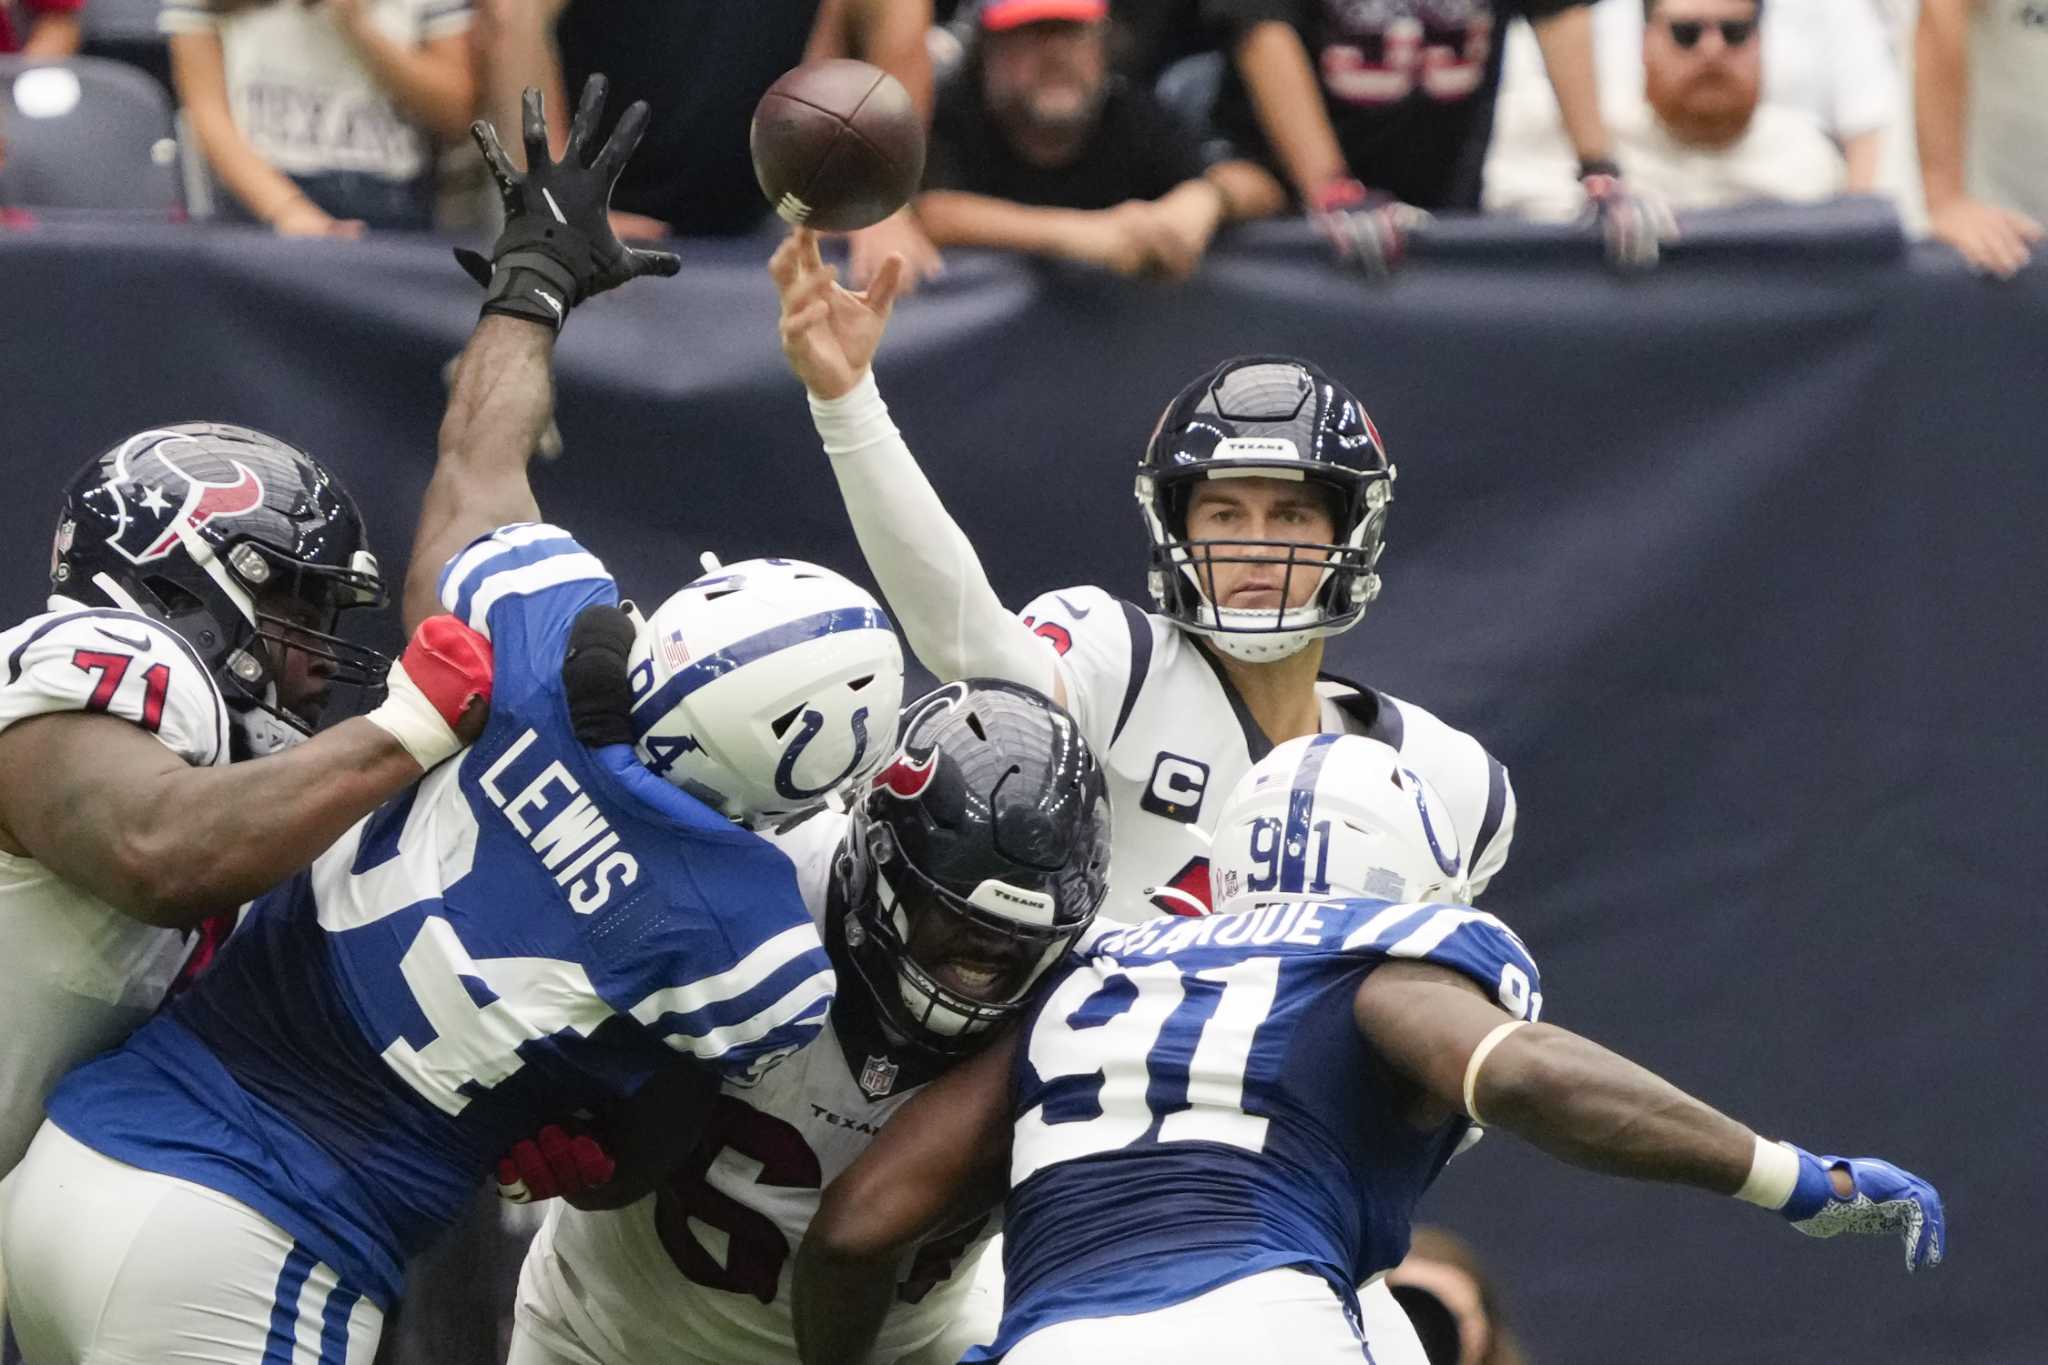 Colts-Texans live stream (9/11): How to watch NFL Week 1 online